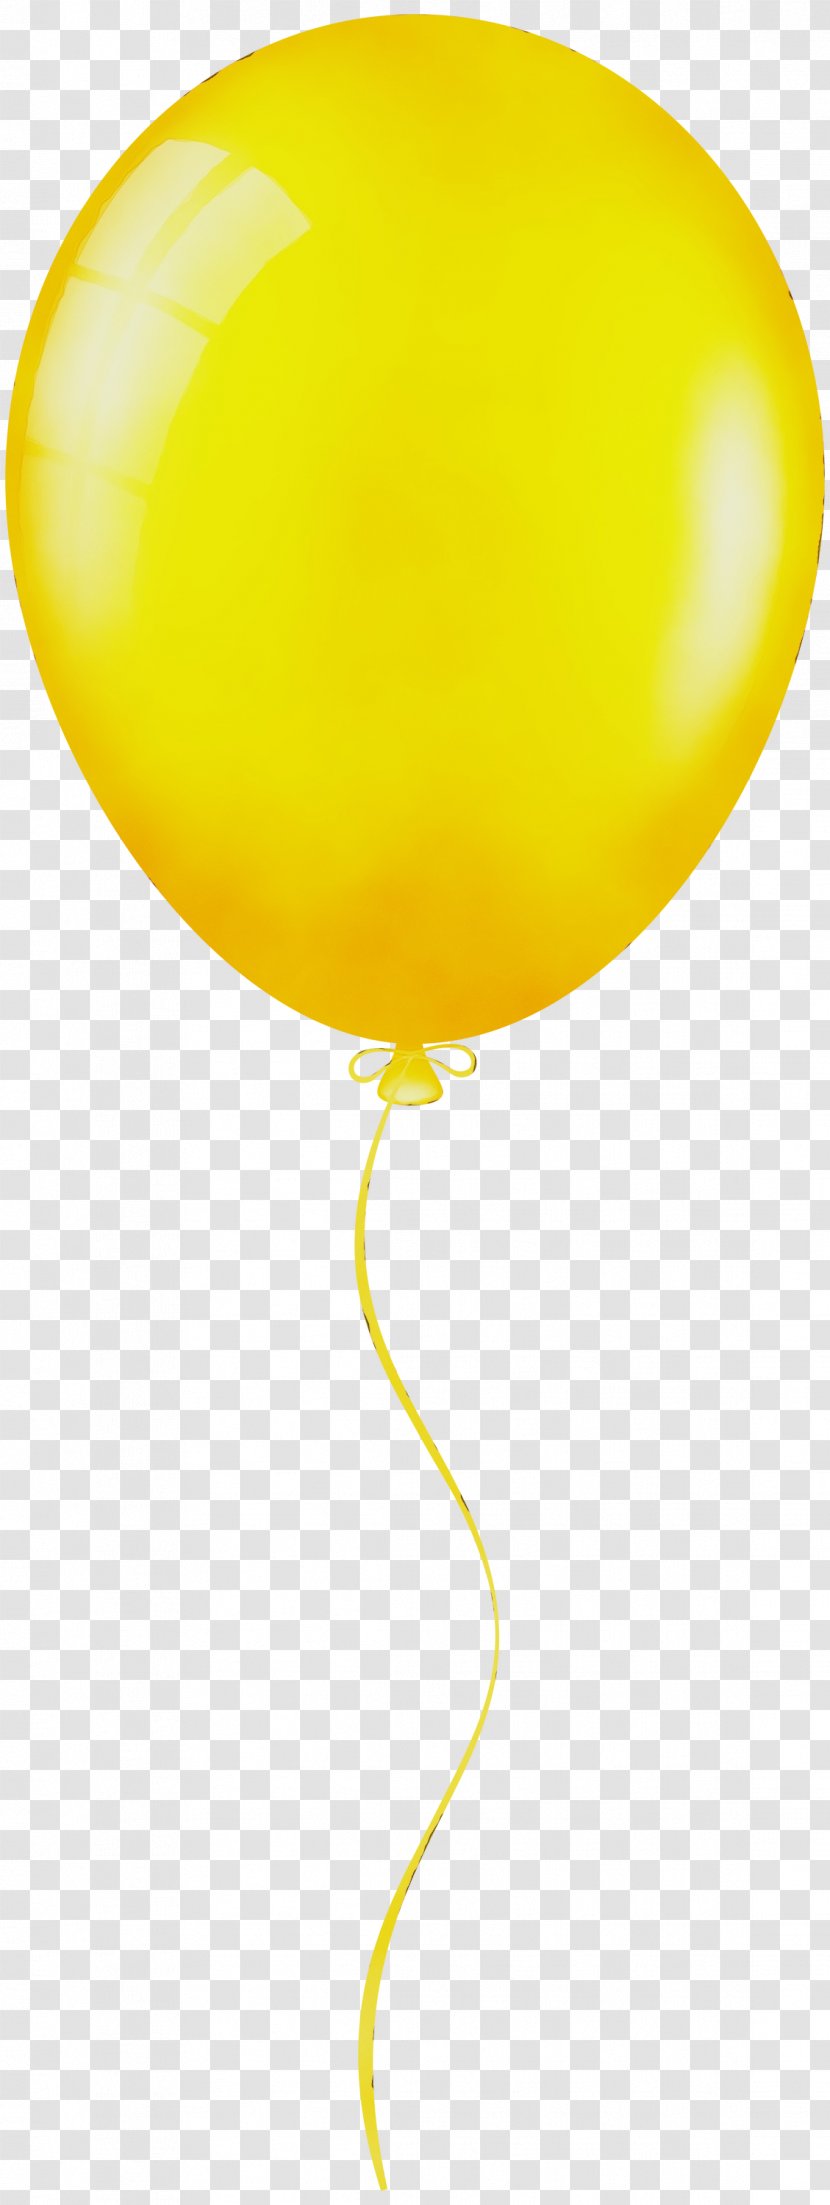 Yellow Balloons Cluster Ballooning Birthday - Toy Smile Transparent PNG